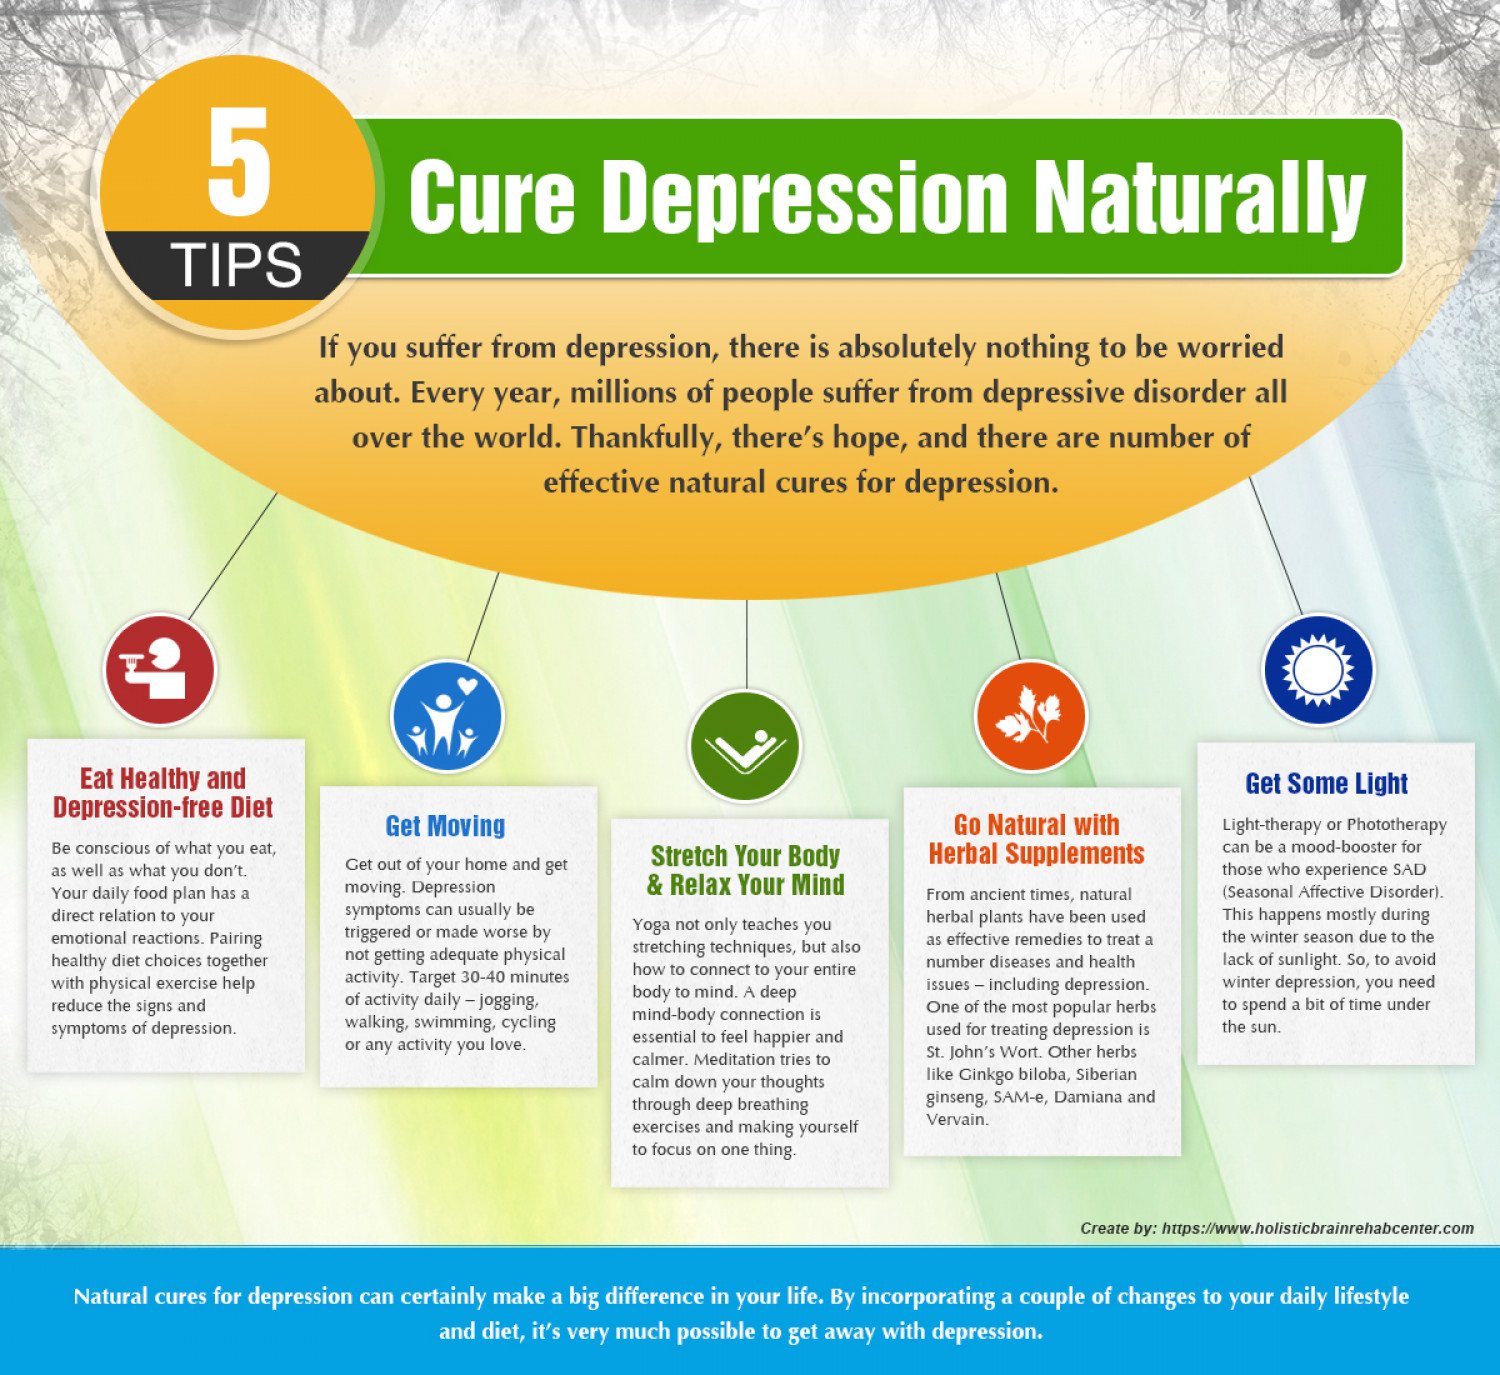 5 Tips to Cure Depression Naturally